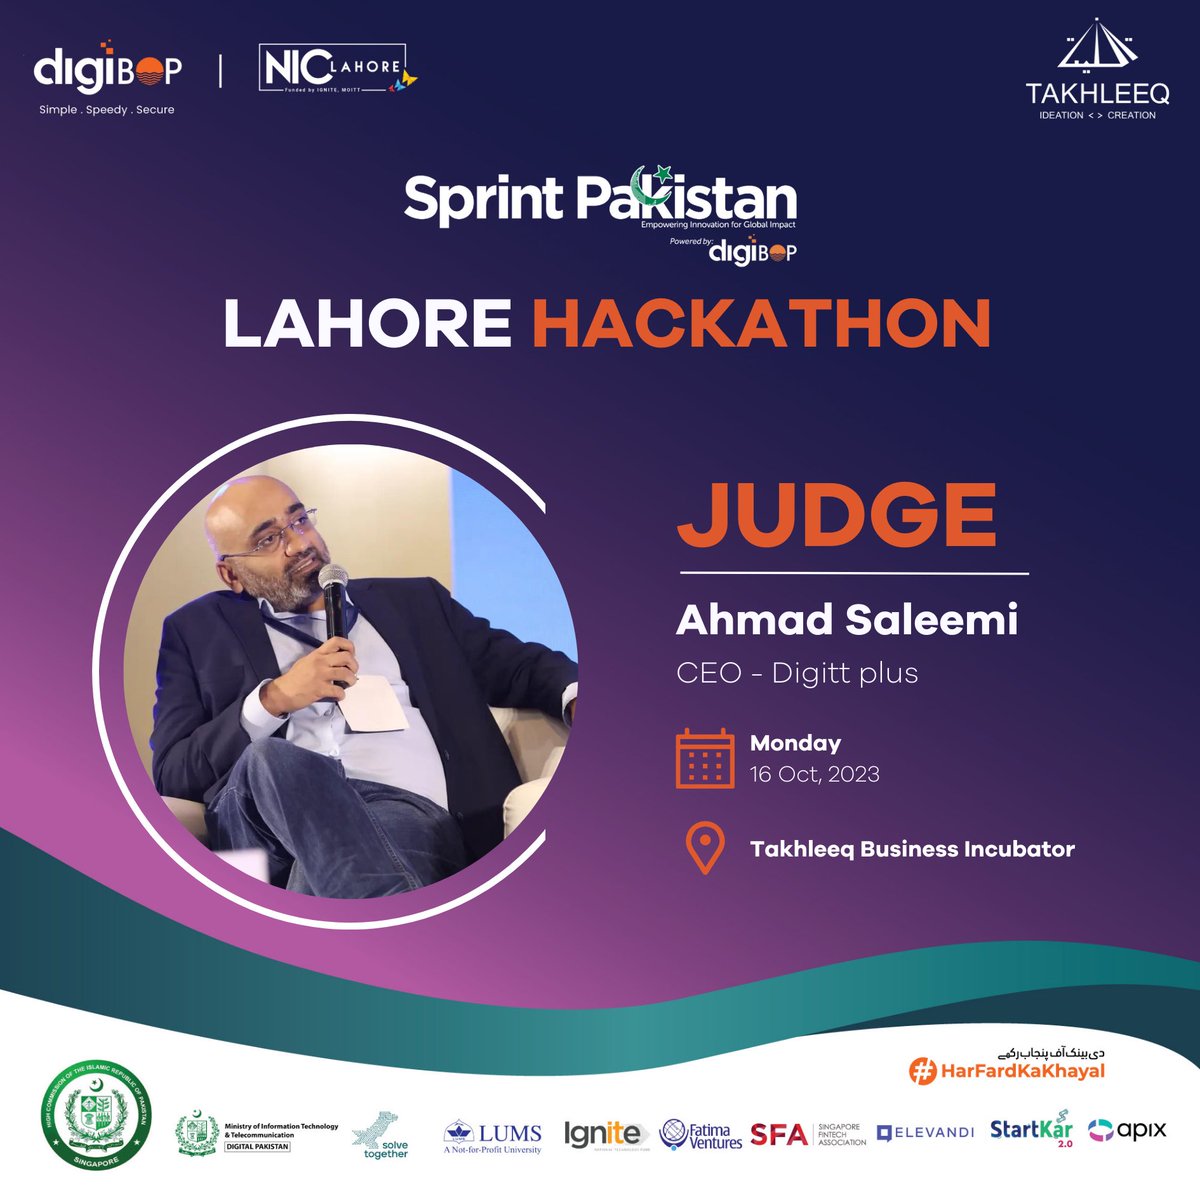 Join us at Sprint Pakistan Hackathon on Monday, 16th October 2023, where industry expert Ahmad Saleemi, CEO at Digitt Plus, will be our esteemed judge! See you there! #SprintPakistan #LetsTakhleeq #ucp #nicpakistan #bop